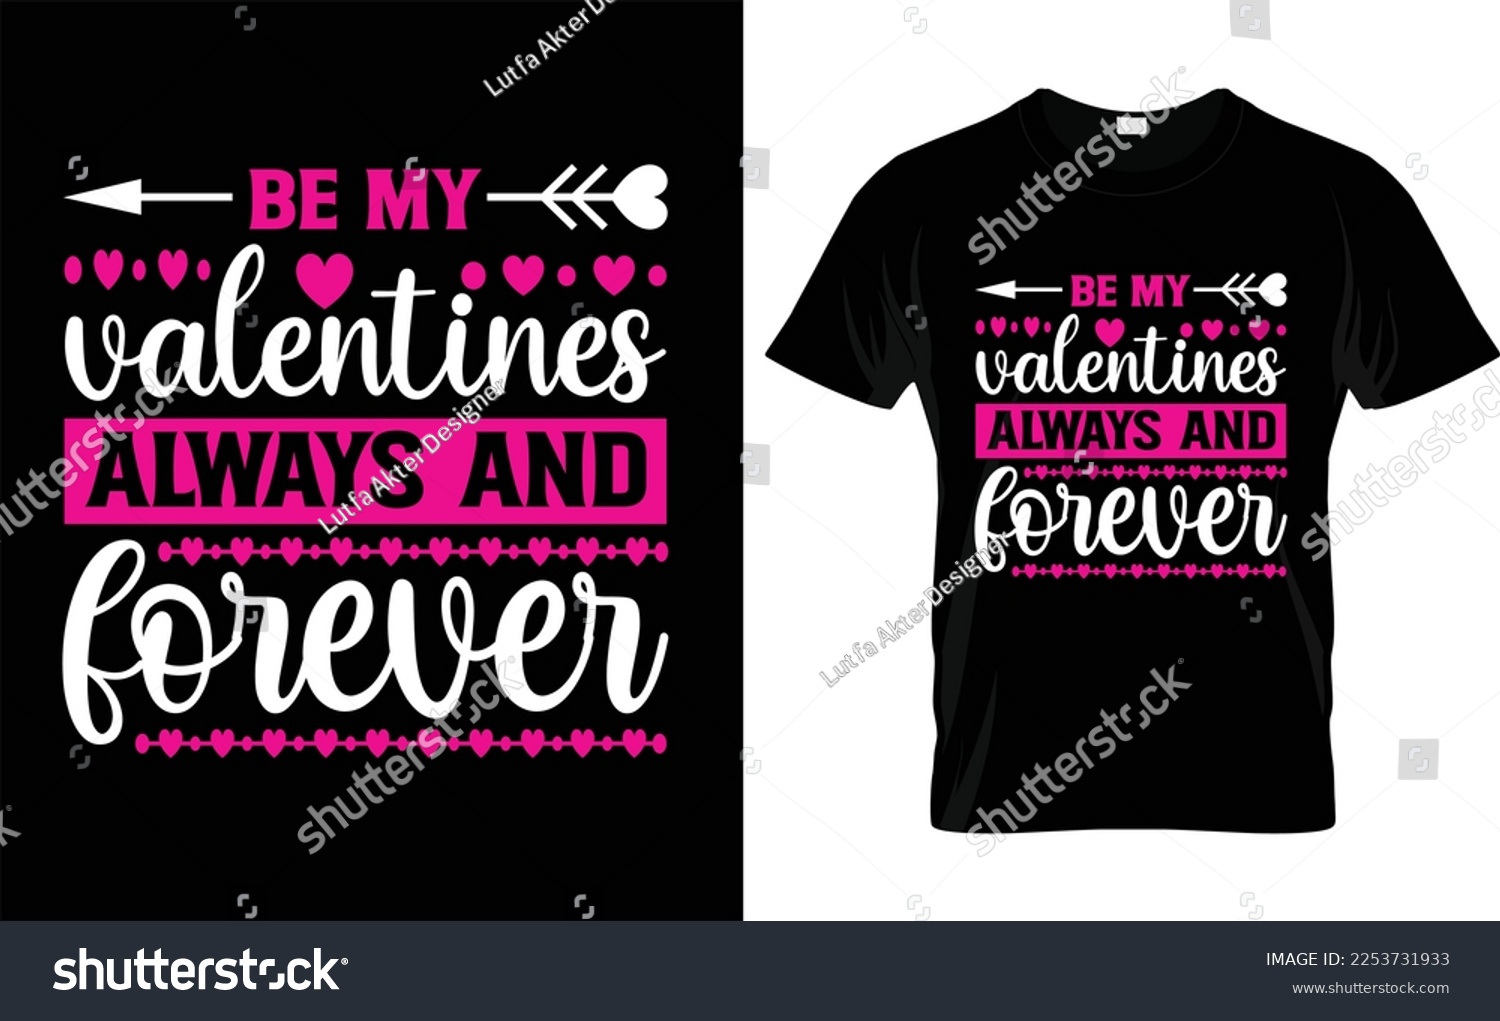 SVG of  

BE MY VALENTINES ALWAYS AND FOREVER, typography,fashion,iove,february,label,heart, VALENTINE'S DAY T SHIRT DESIGN
 
 svg